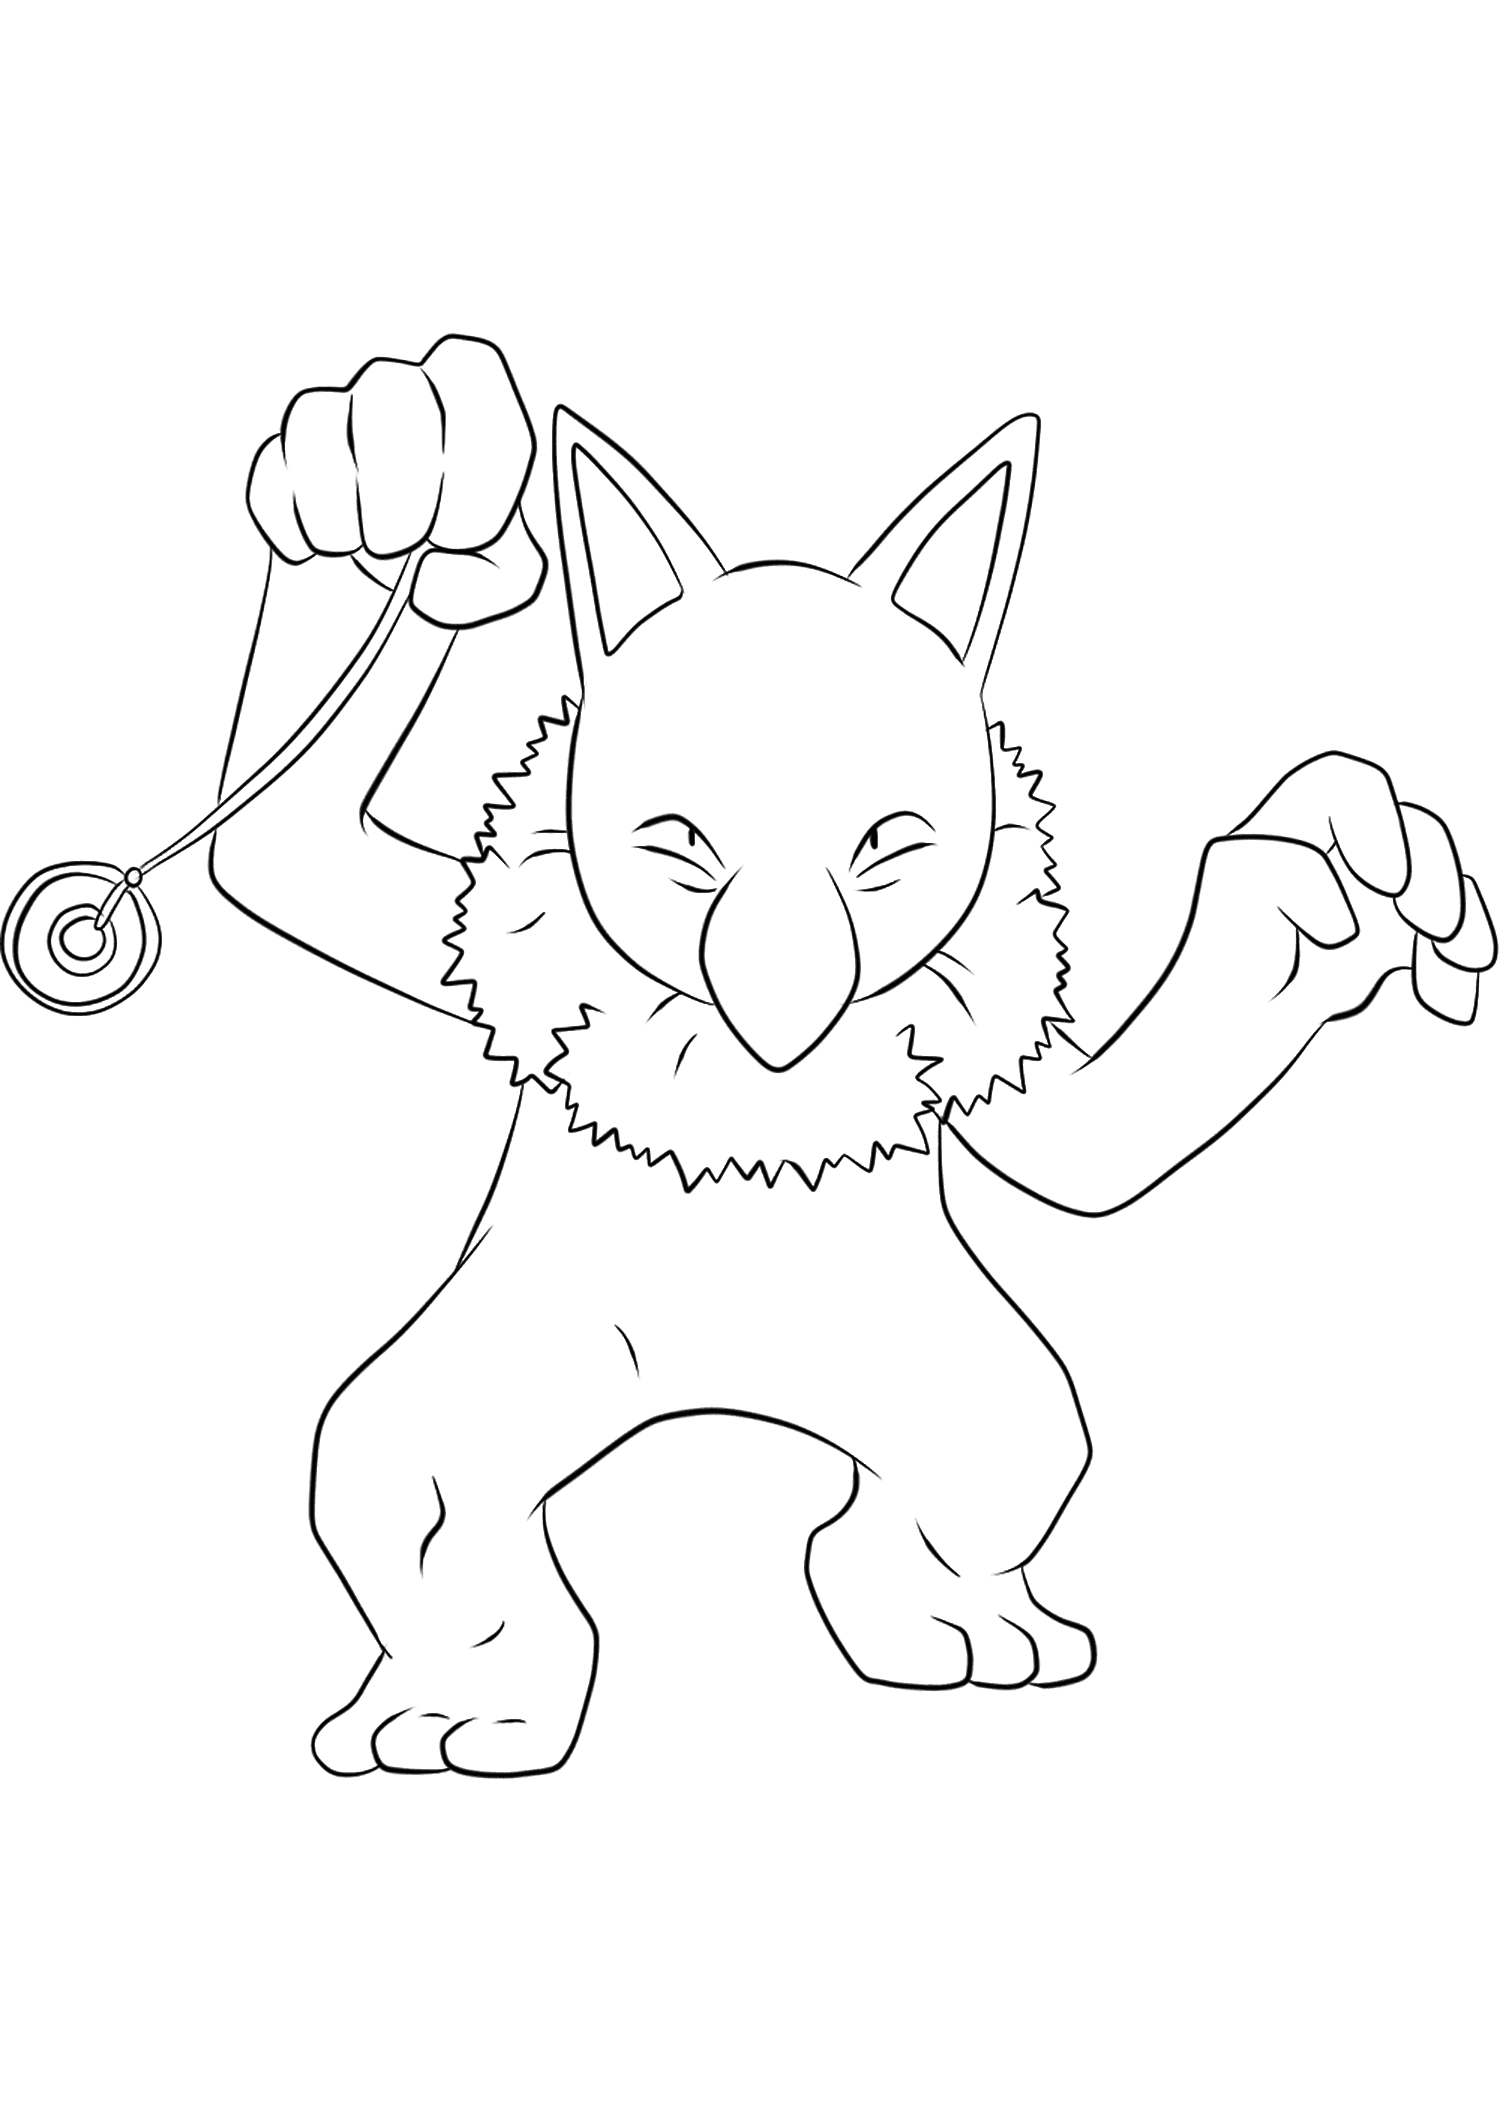 Hypno (No.97). Hypno Coloring page, Generation I Pokemon of type PsychicOriginal image credit: Pokemon linearts by Lilly Gerbil on Deviantart.Permission:  All rights reserved © Pokemon company and Ken Sugimori.